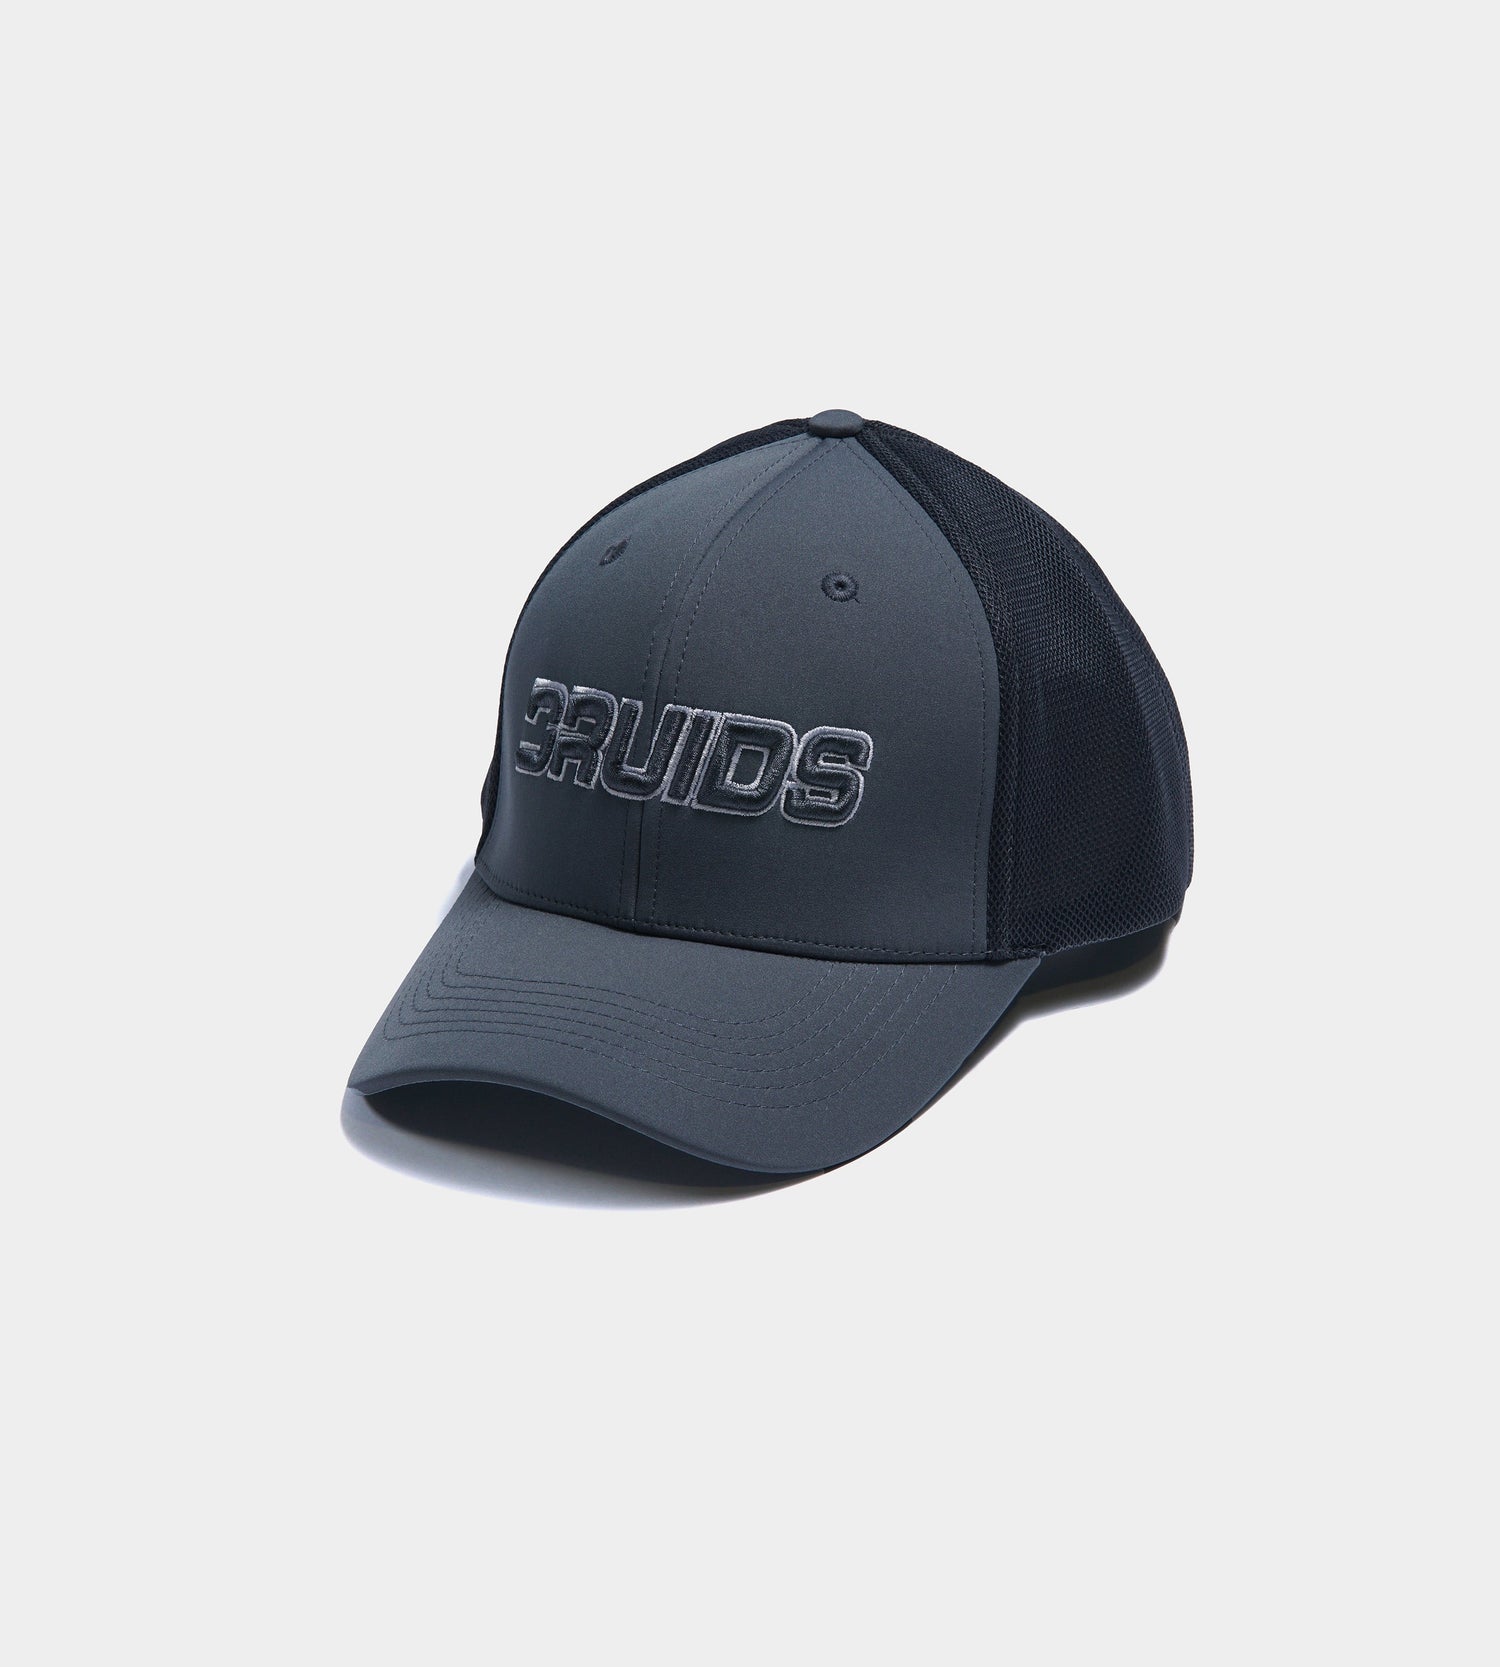 OUTLINE FITTED TRUCKER CAP - GREY - DRUIDS